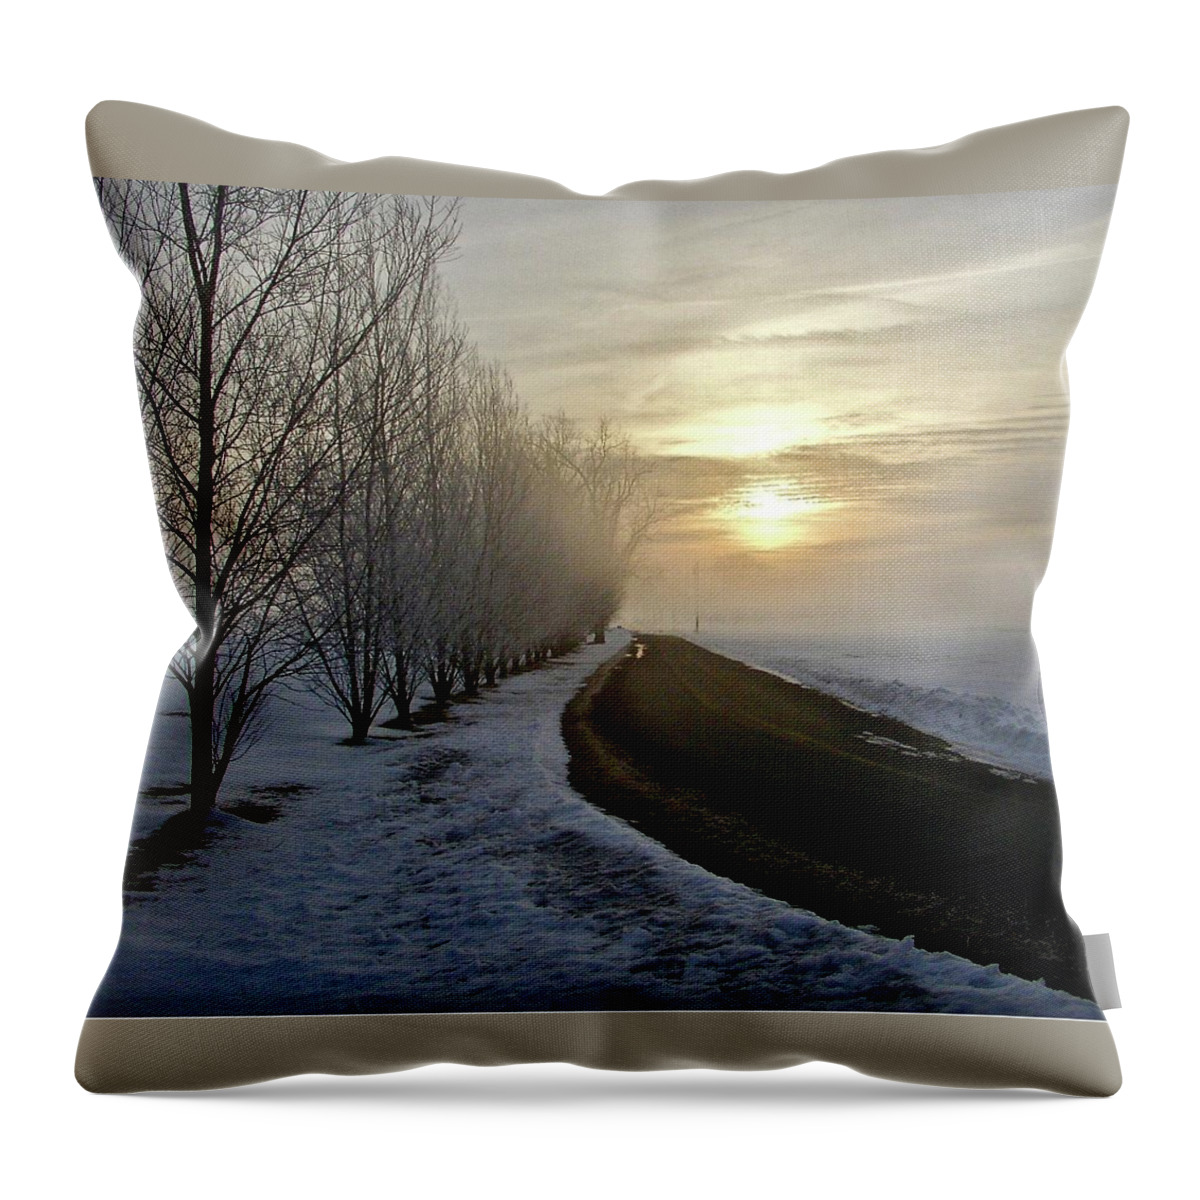 Winter Throw Pillow featuring the photograph Winter Sunrise by Shawn M Greener